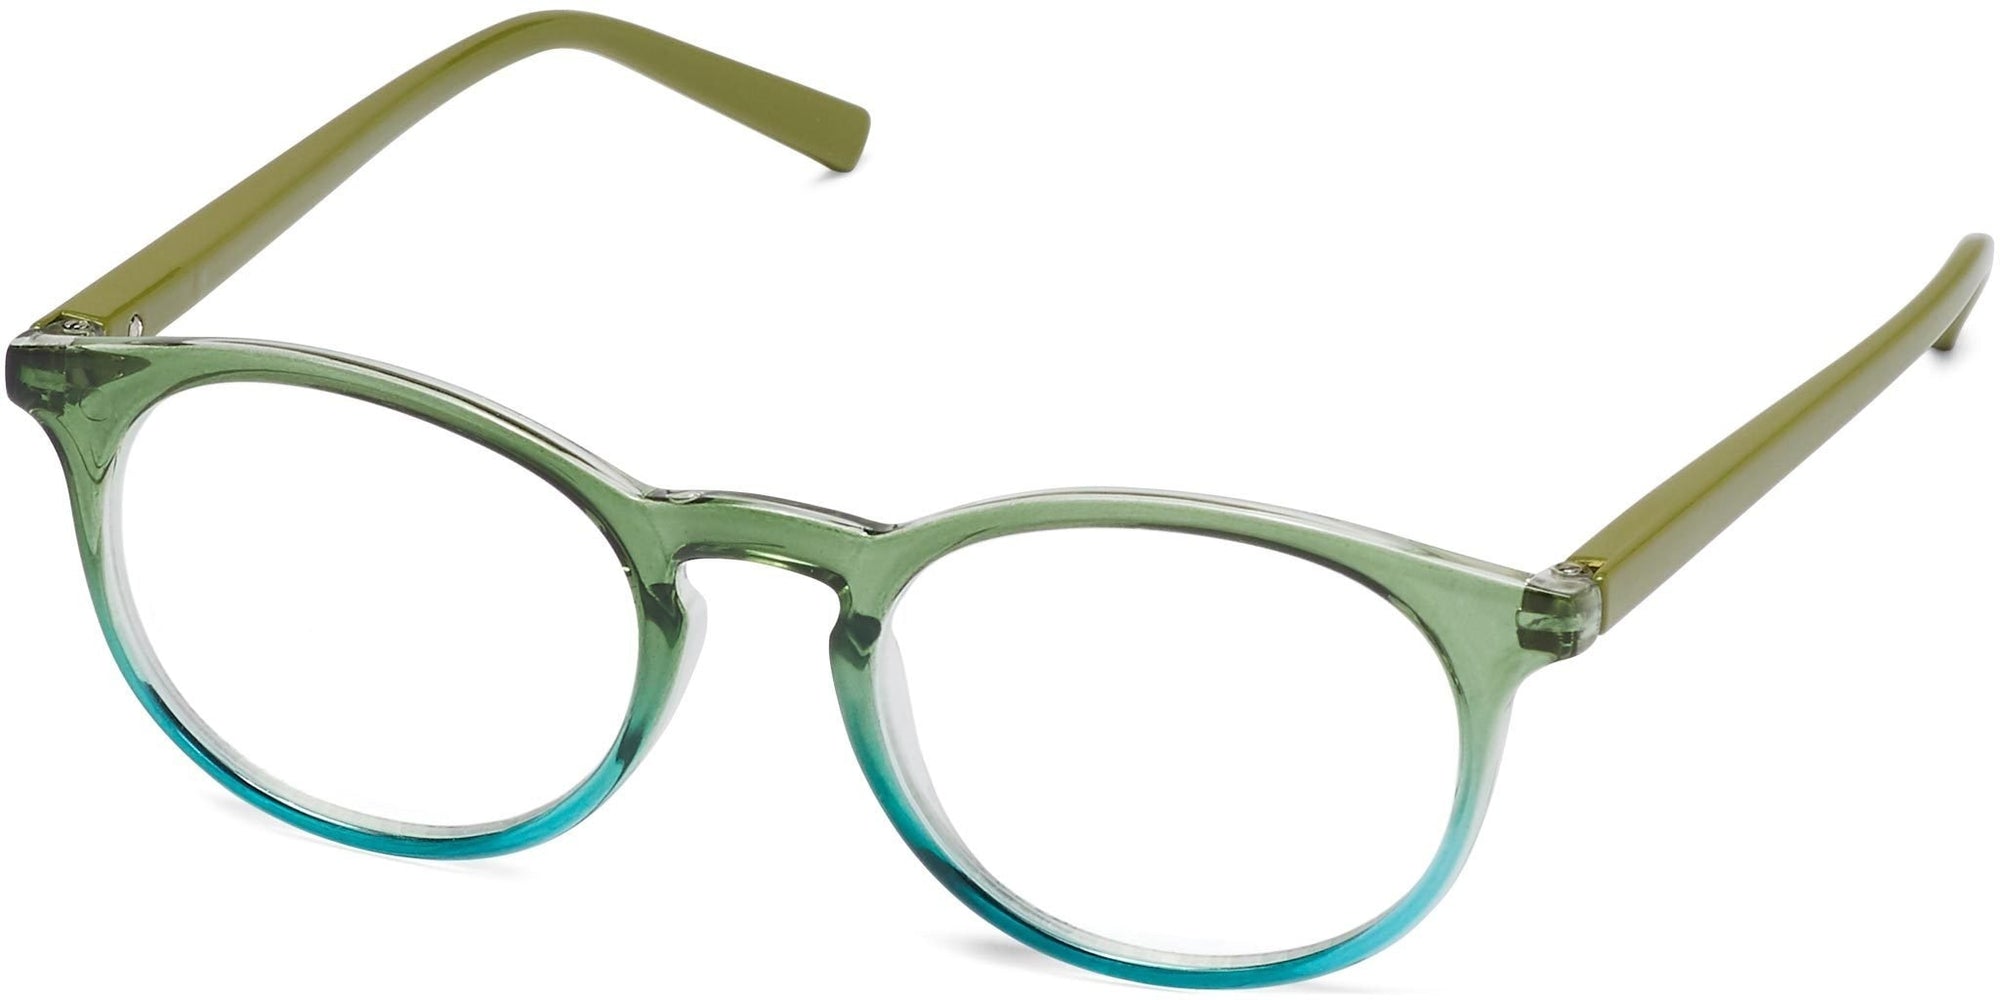 Formosa - Green/Turquoise / 1.25 - Reading Glasses